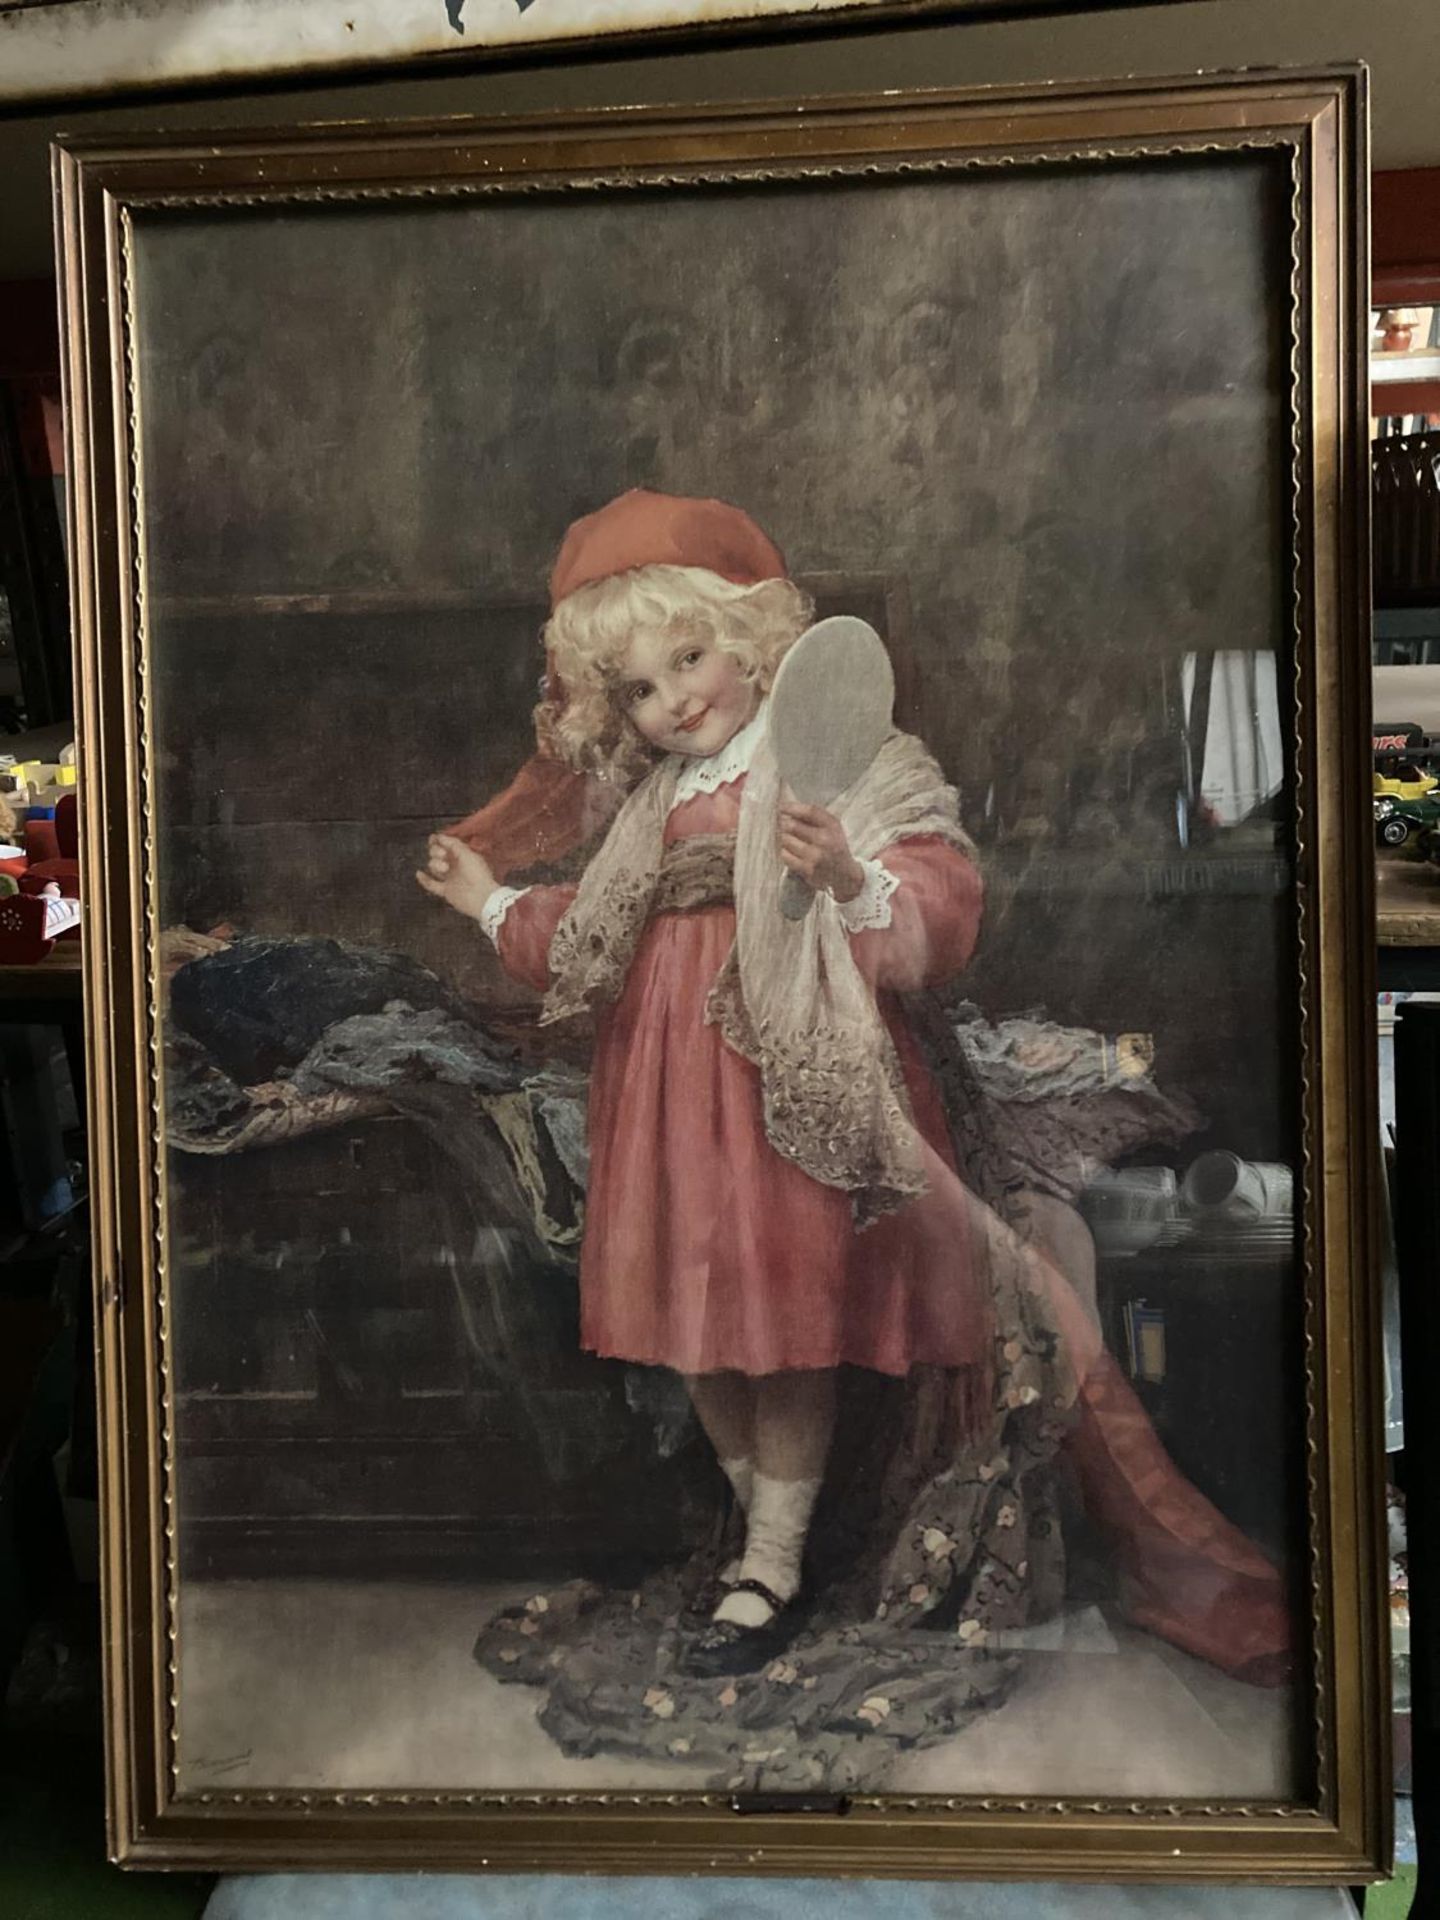 A PERCY TARRANT FRAMED EDWARDIAN PRINT OF A GIRL IN RED HOLDING A MIRROR